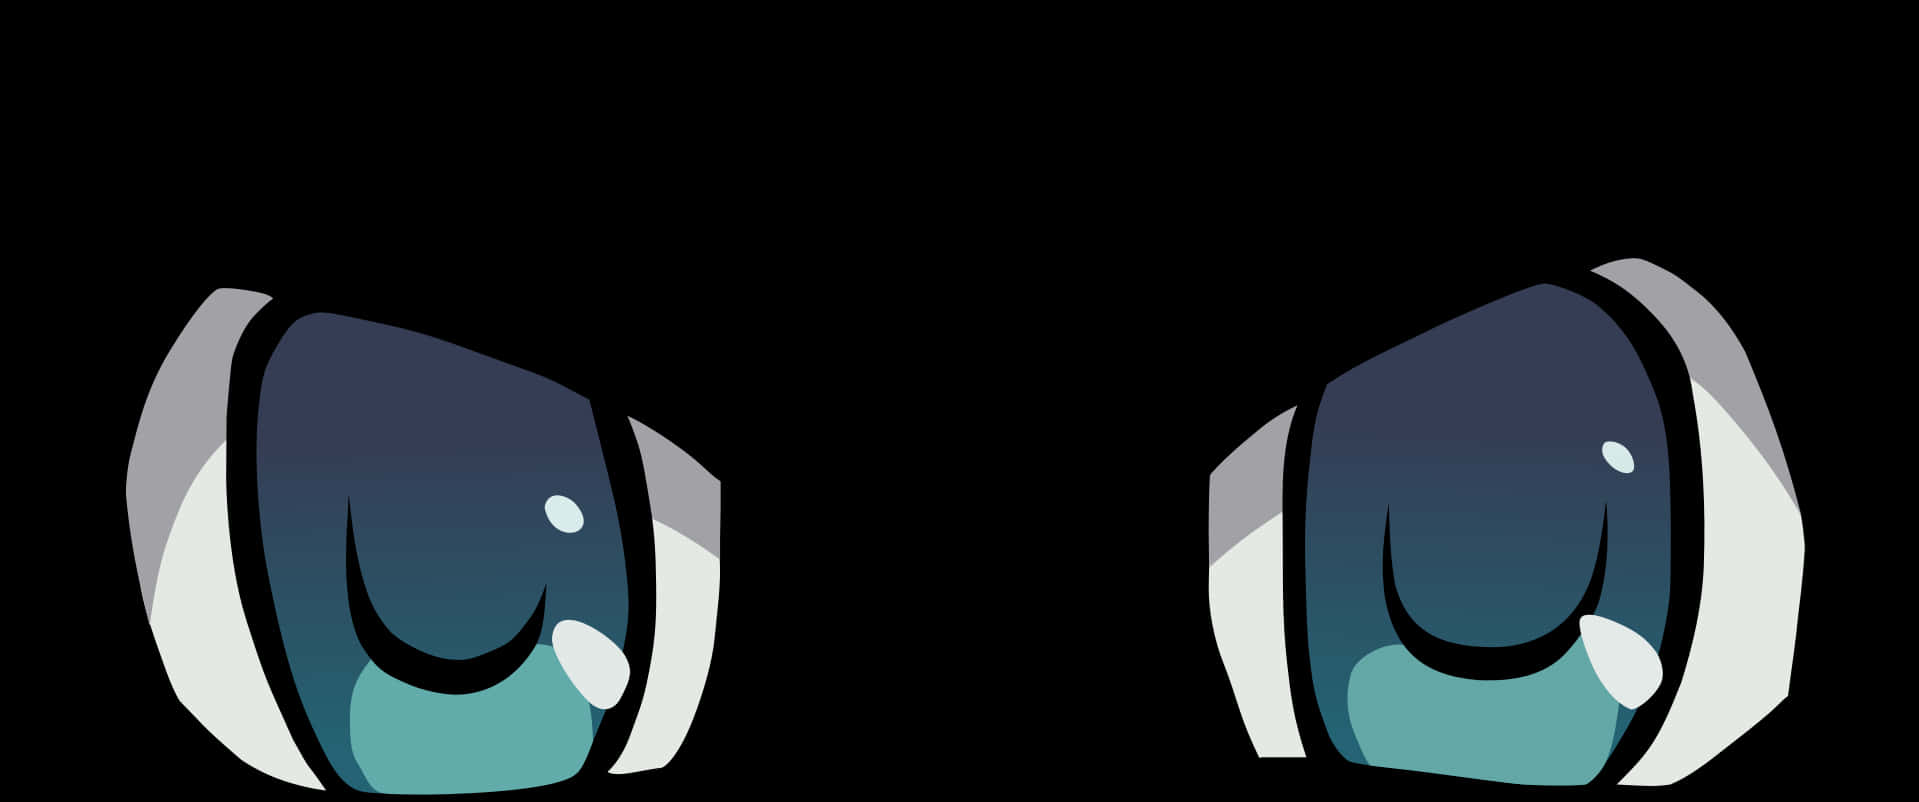 Stylized Anime Eyes Vector PNG